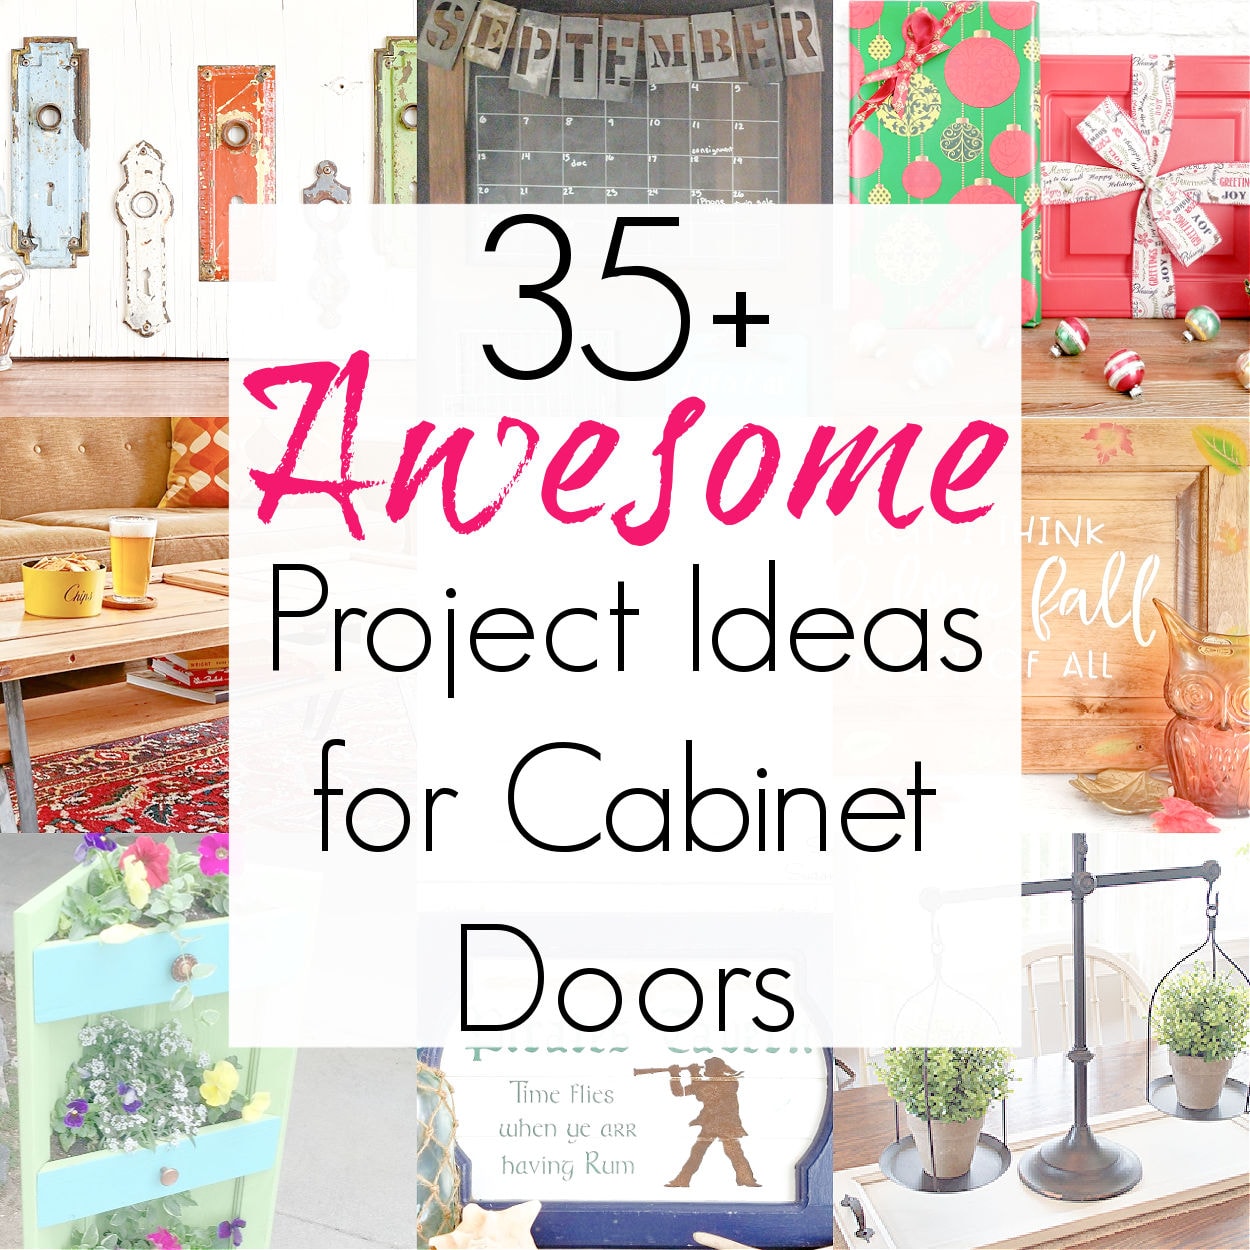 Upcycling Projects that Repurpose Cabinet Doors